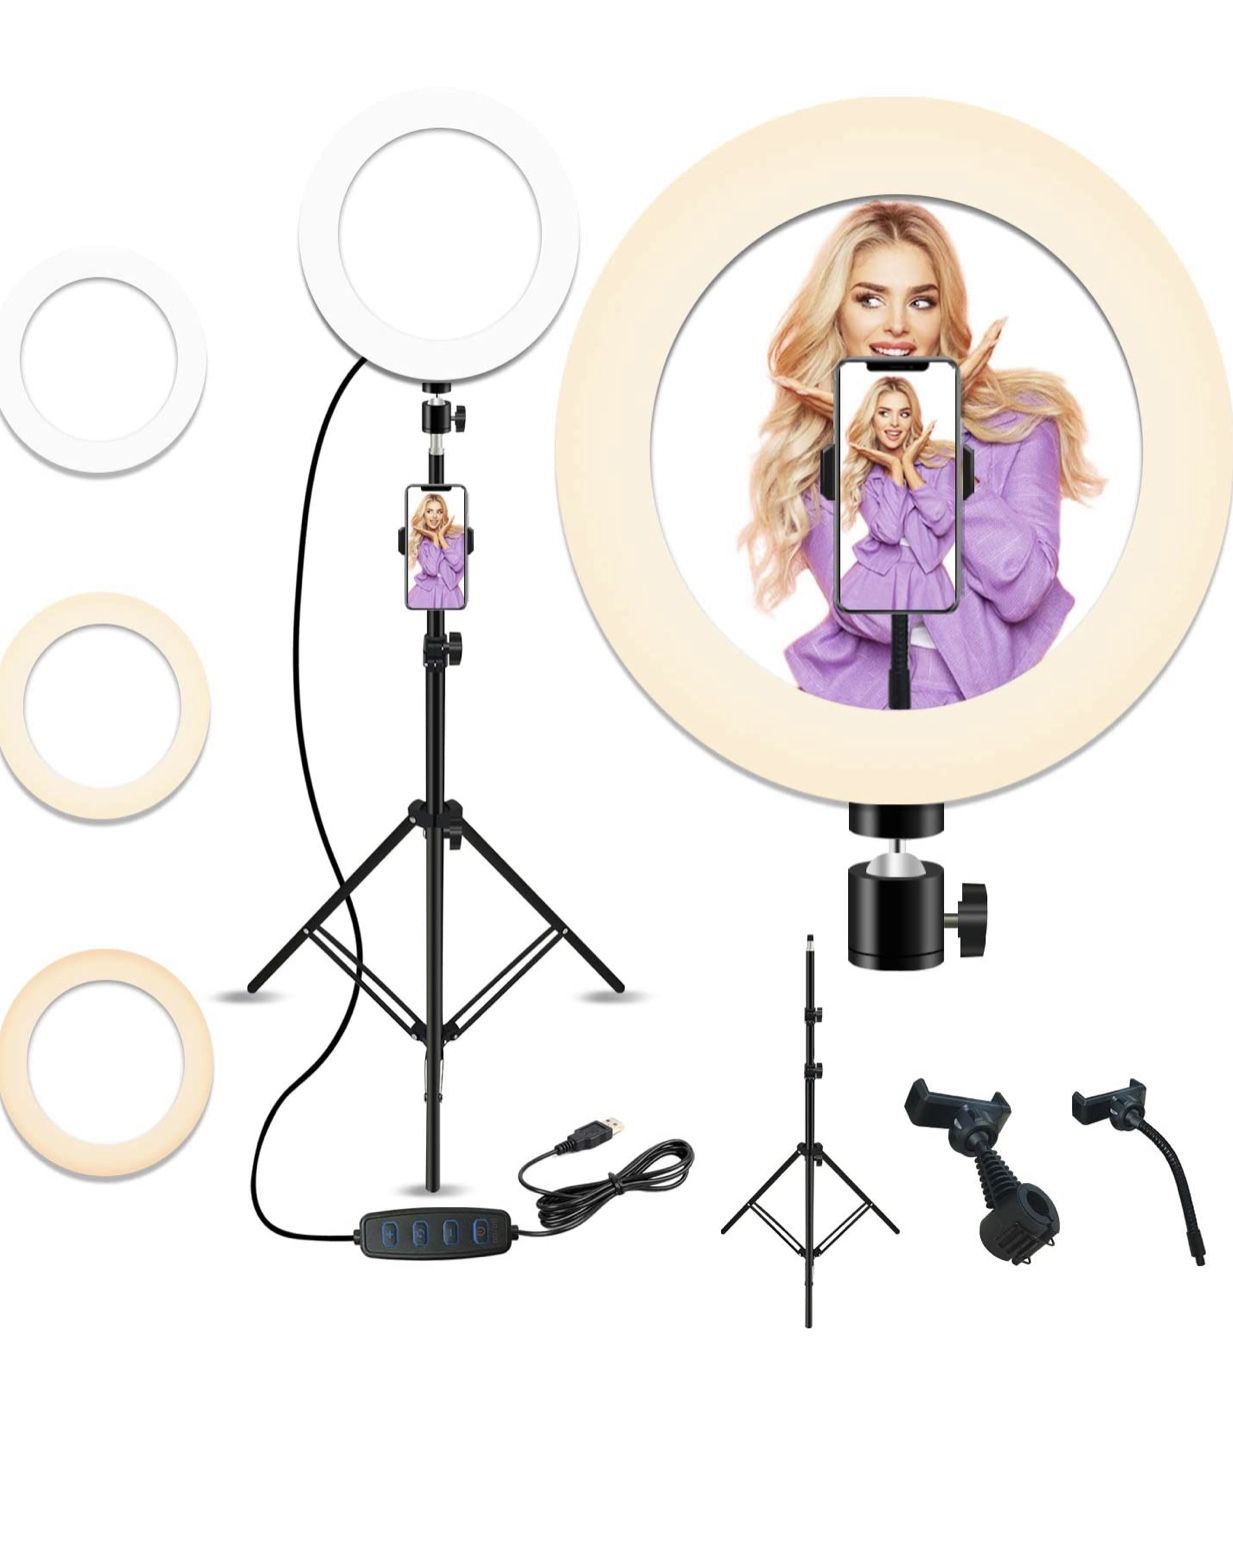 10'' Selfie Ring Light with 28.1'' to 83.8'' Extendable Tripod Stand,Peteme LED Ring Light with Phone Holder for Live Streaming/Makeup/YouTube Video/